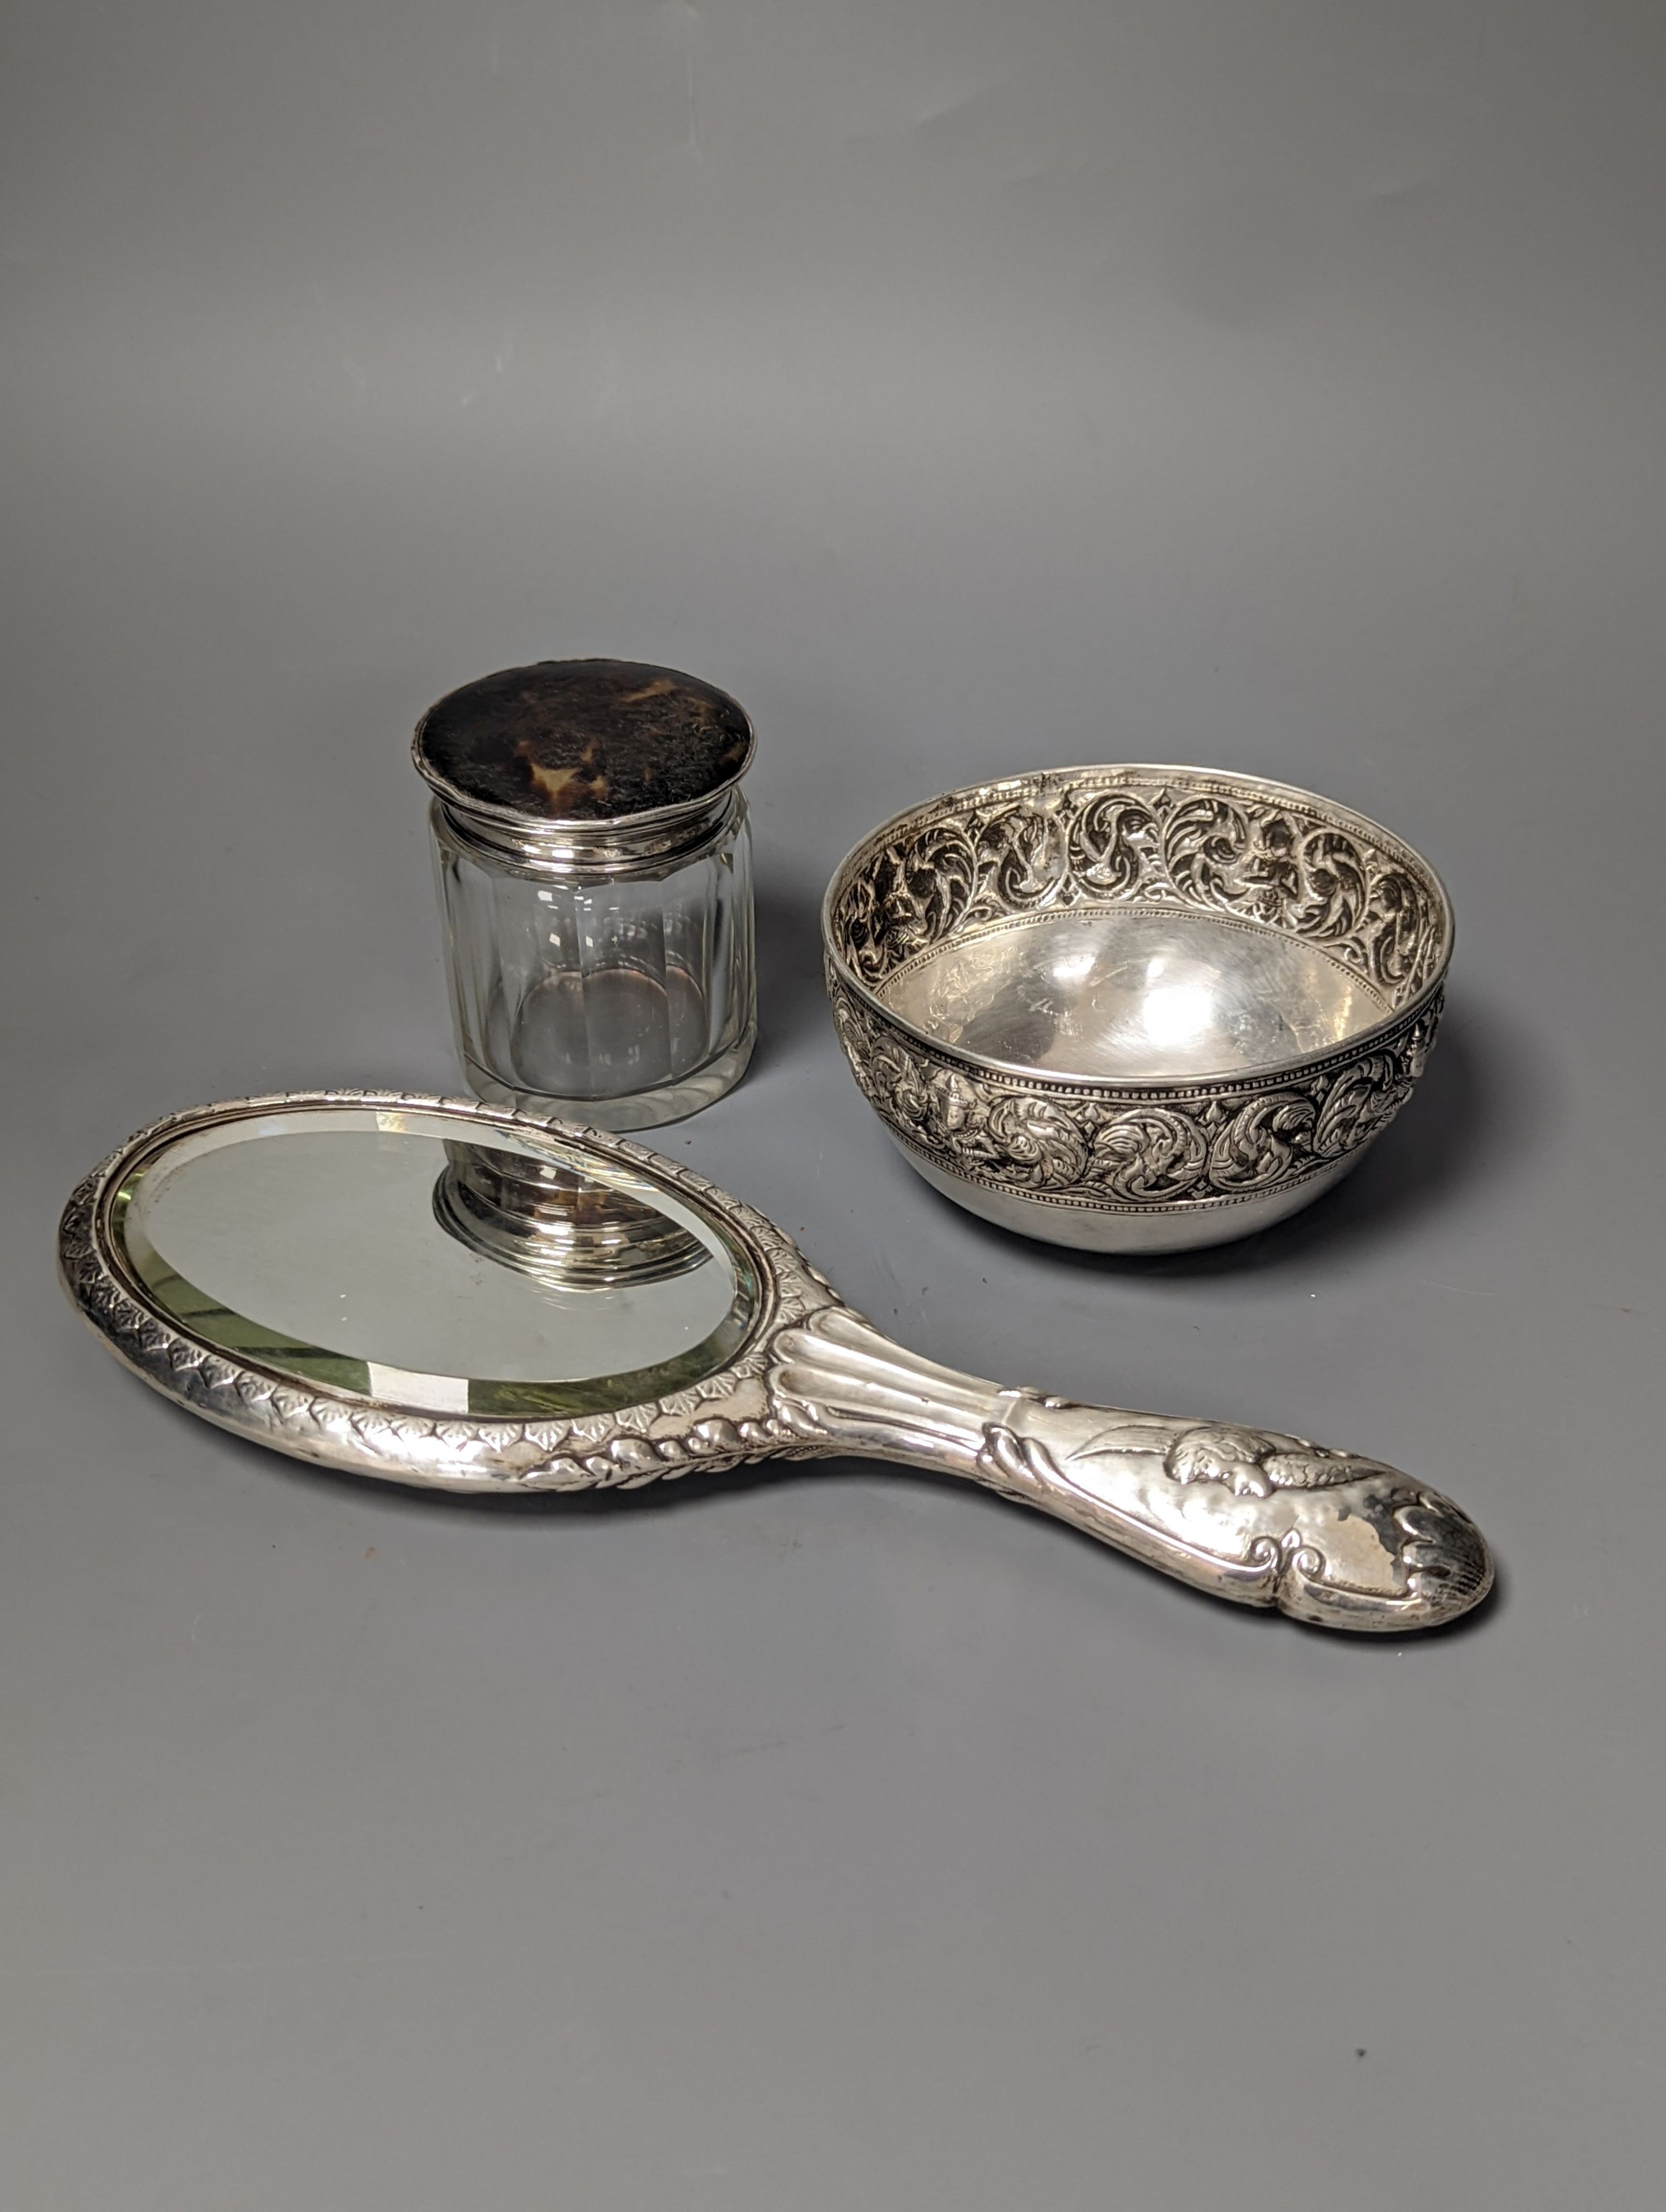 An Edwardian silver mounted 'Reynold's Angels' hand mirror, a silver and tortoiseshell lidded glass toilet jar and a Thai? white metal bowl.